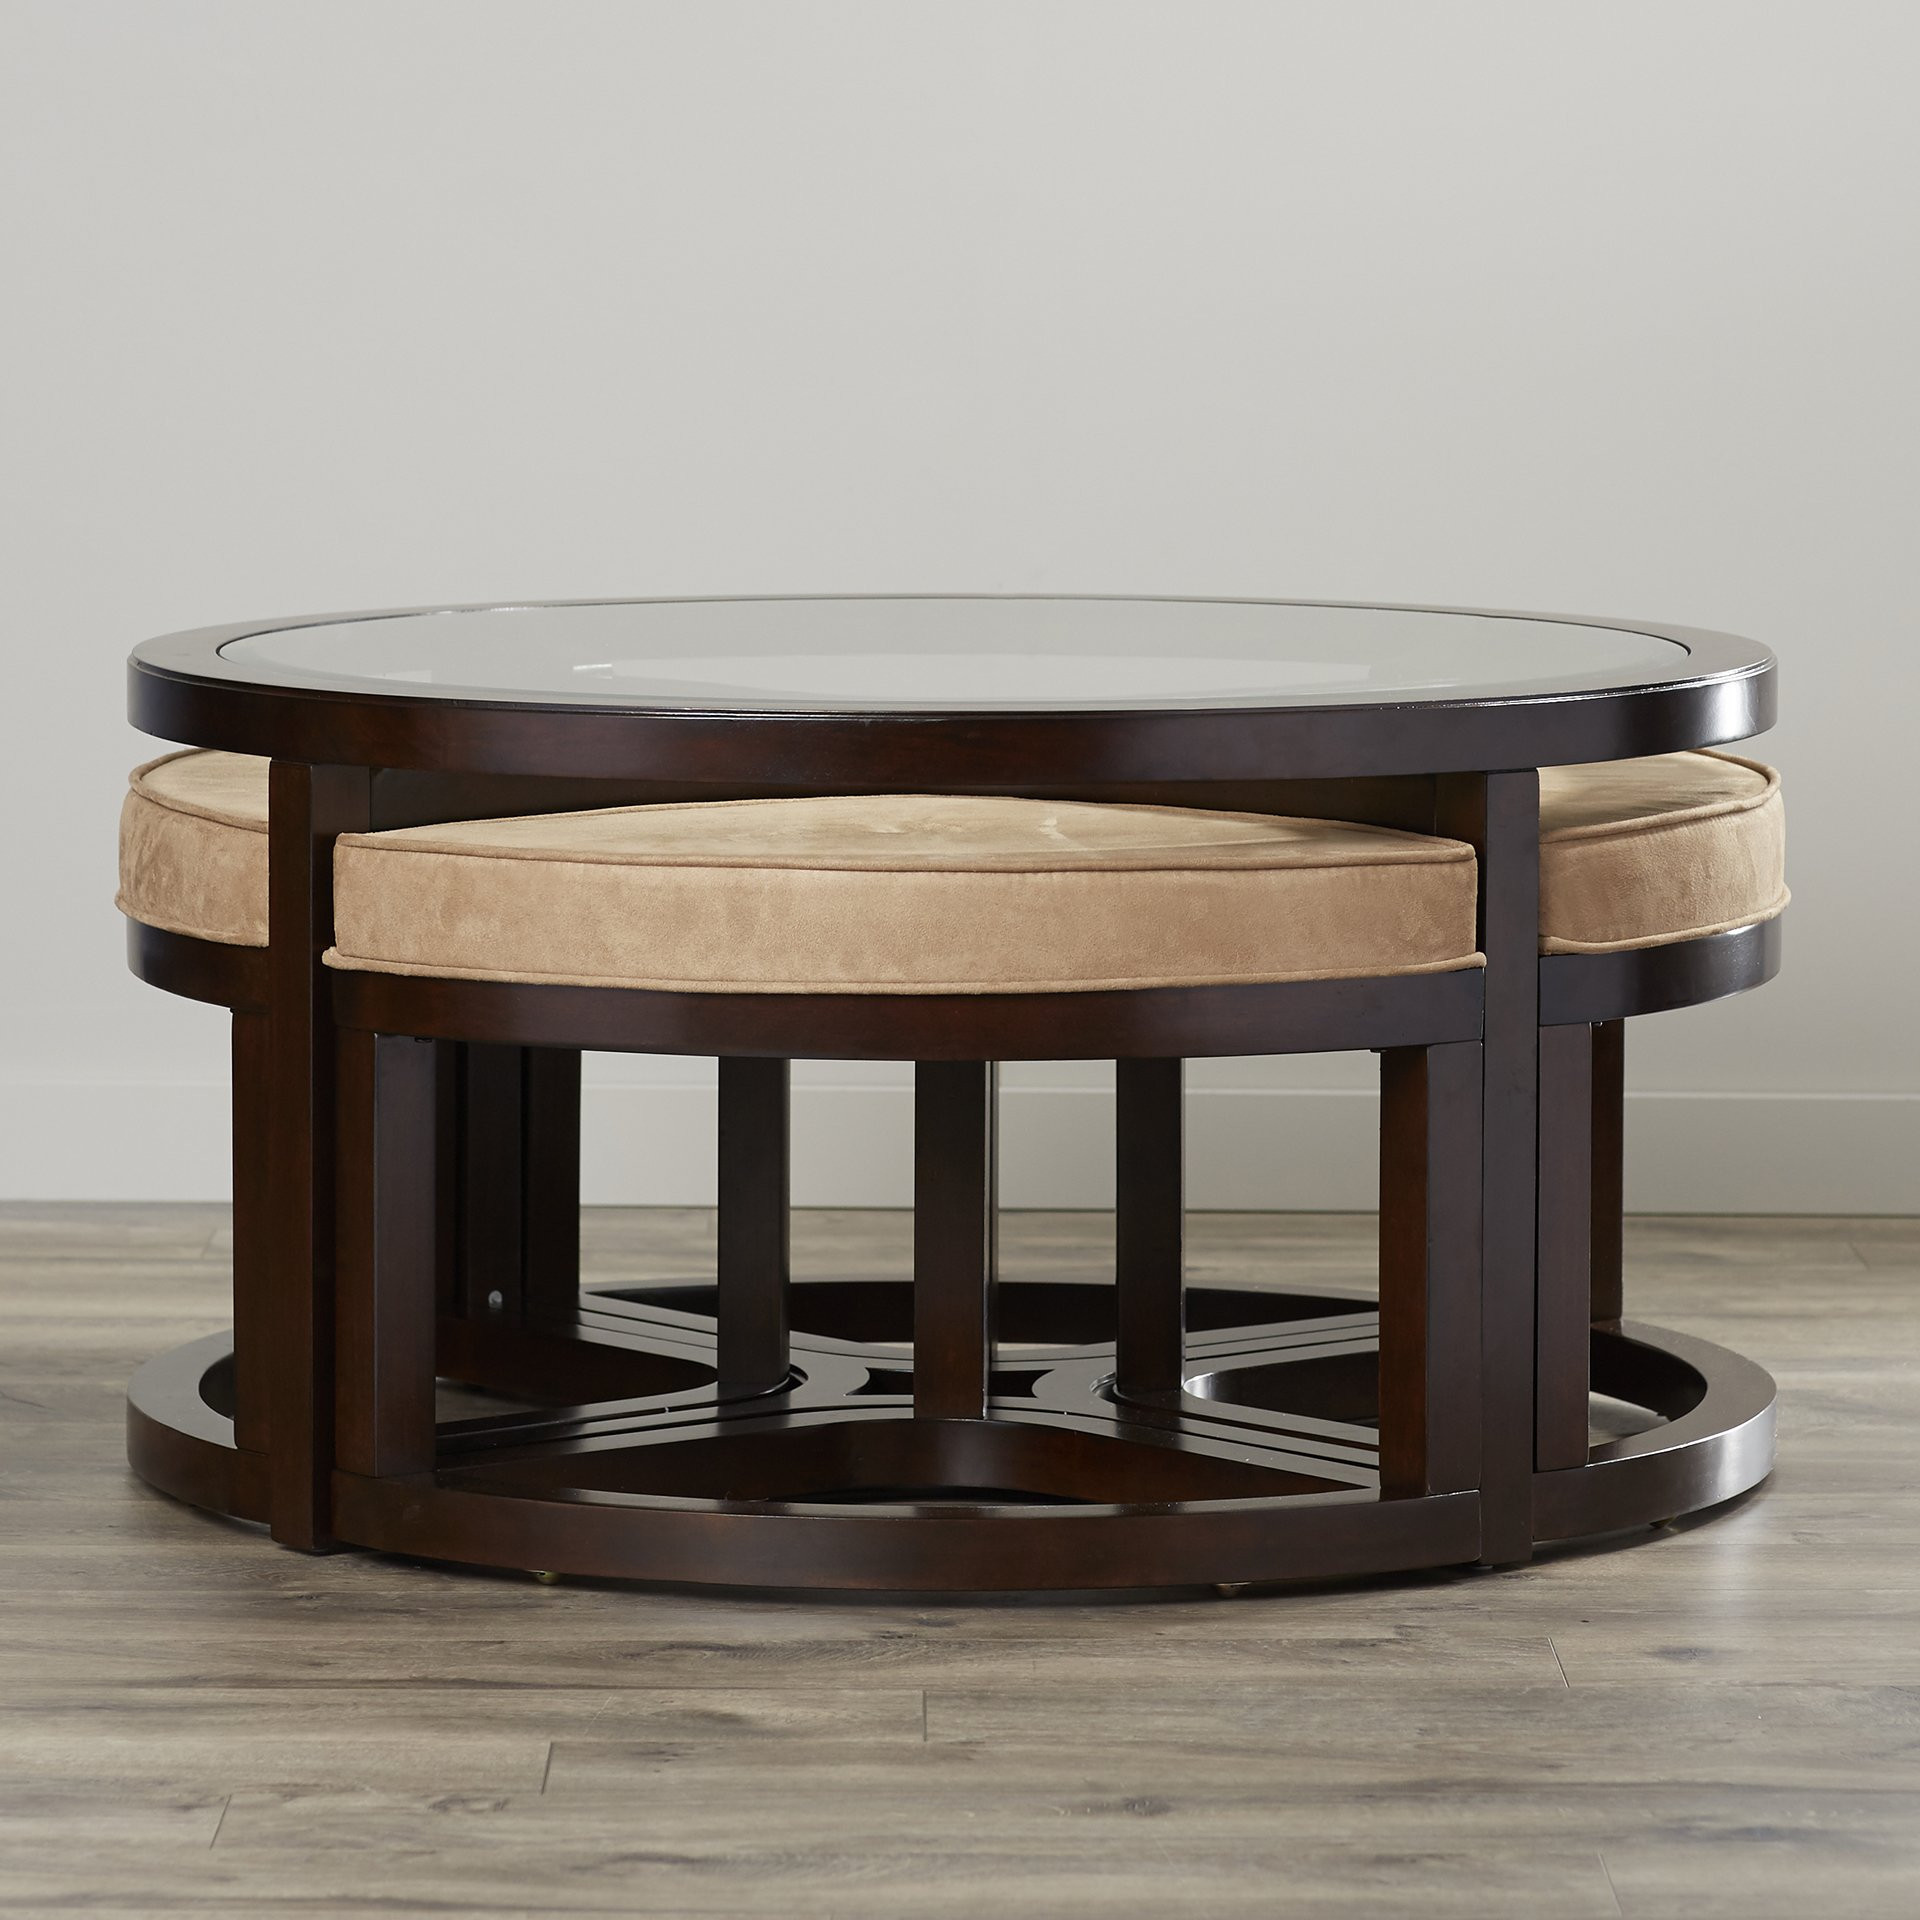 Best ideas about Coffee Table With Stools
. Save or Pin Red Barrel Studio Sun King Coffee Table and stools Now.